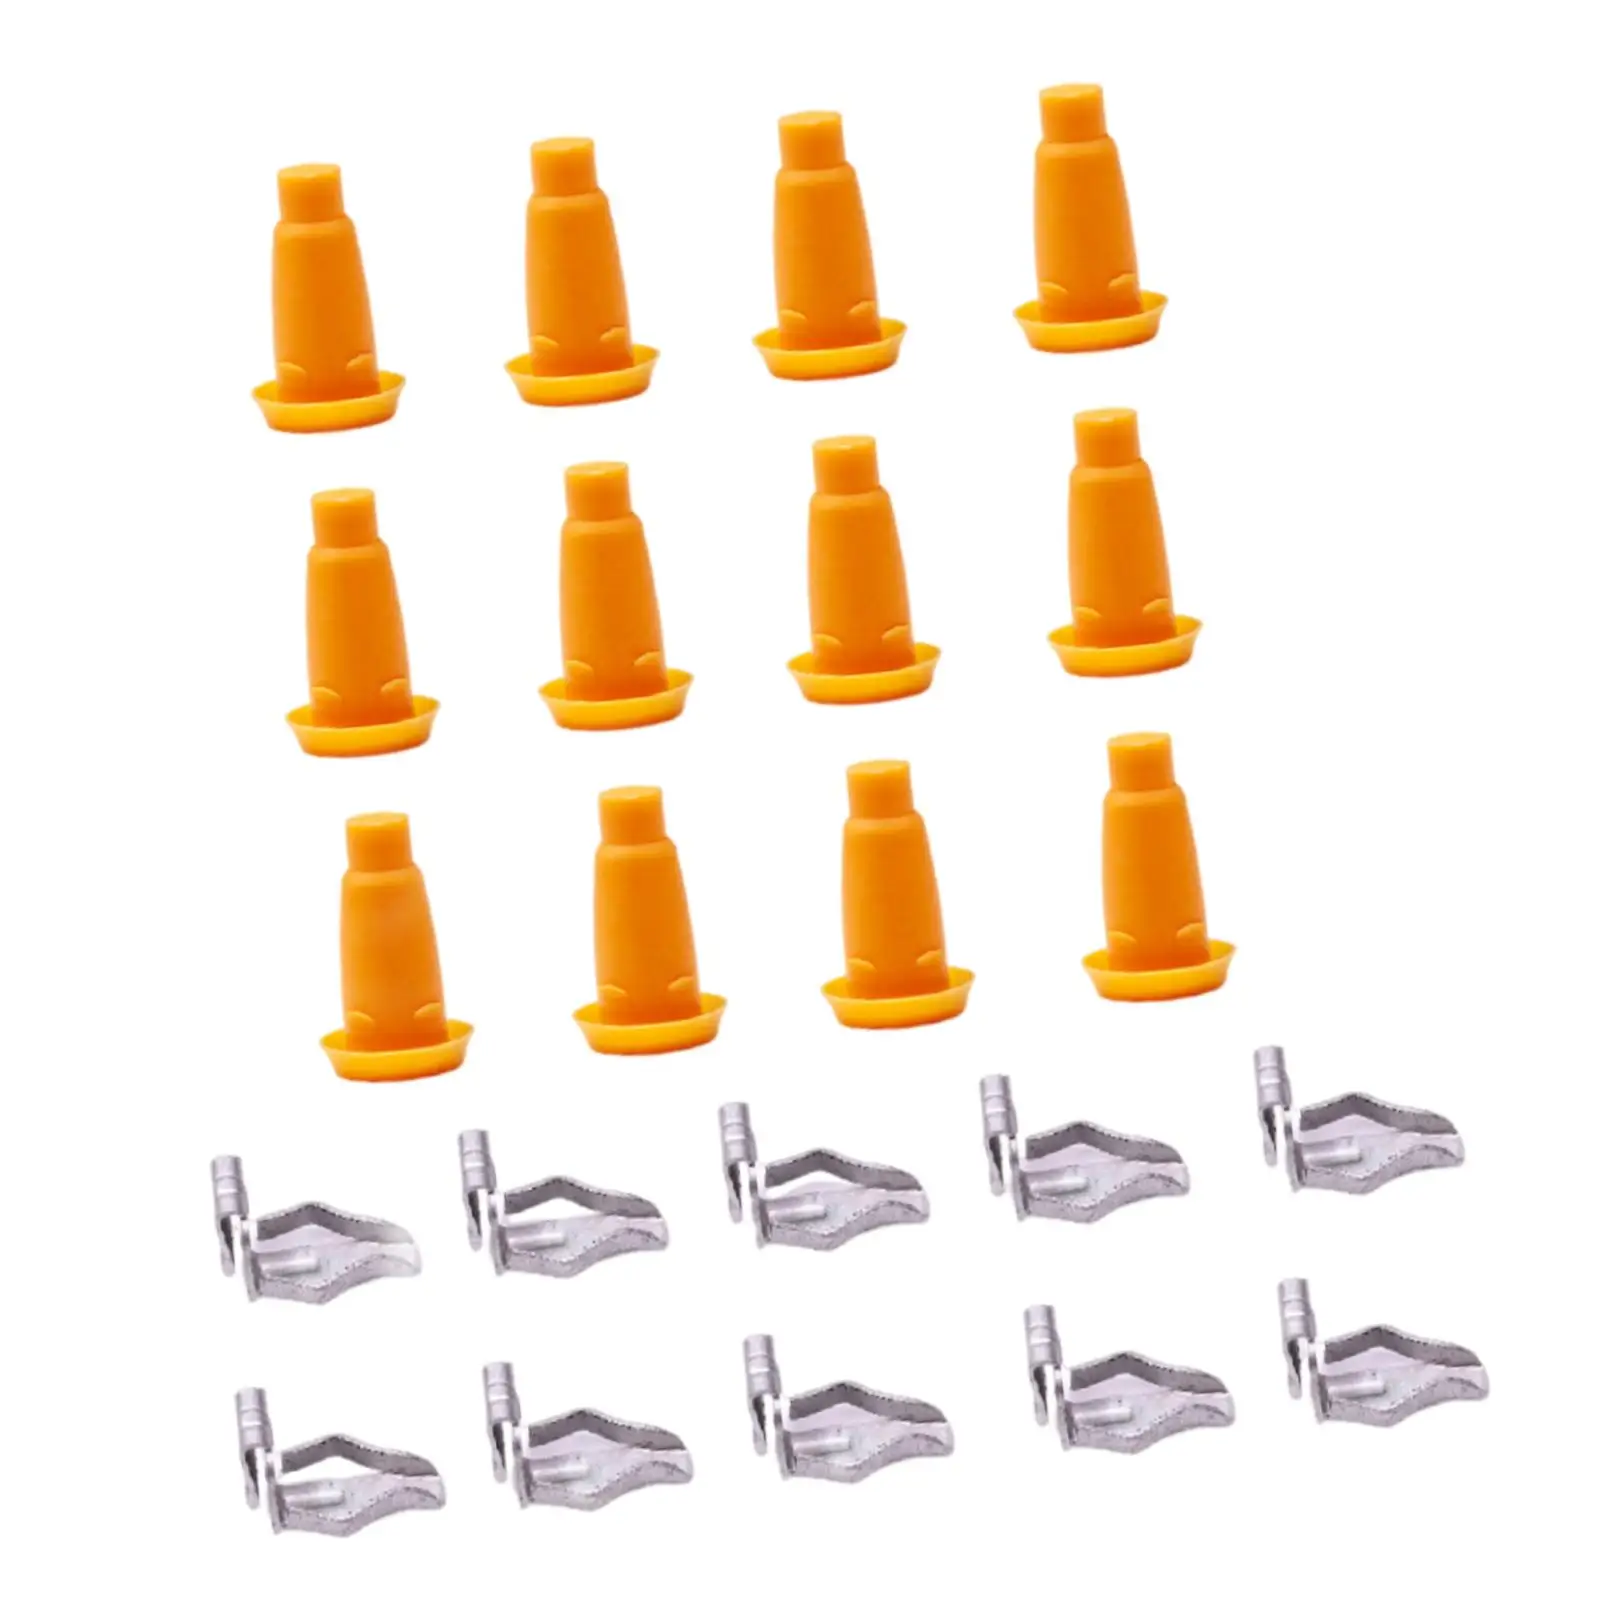 24Pcs Door Panel Frame Plugs & Clips Replacement 4500027 Repair Kit for Chevy Camaro Corvair Chevelle Fullsize Professional